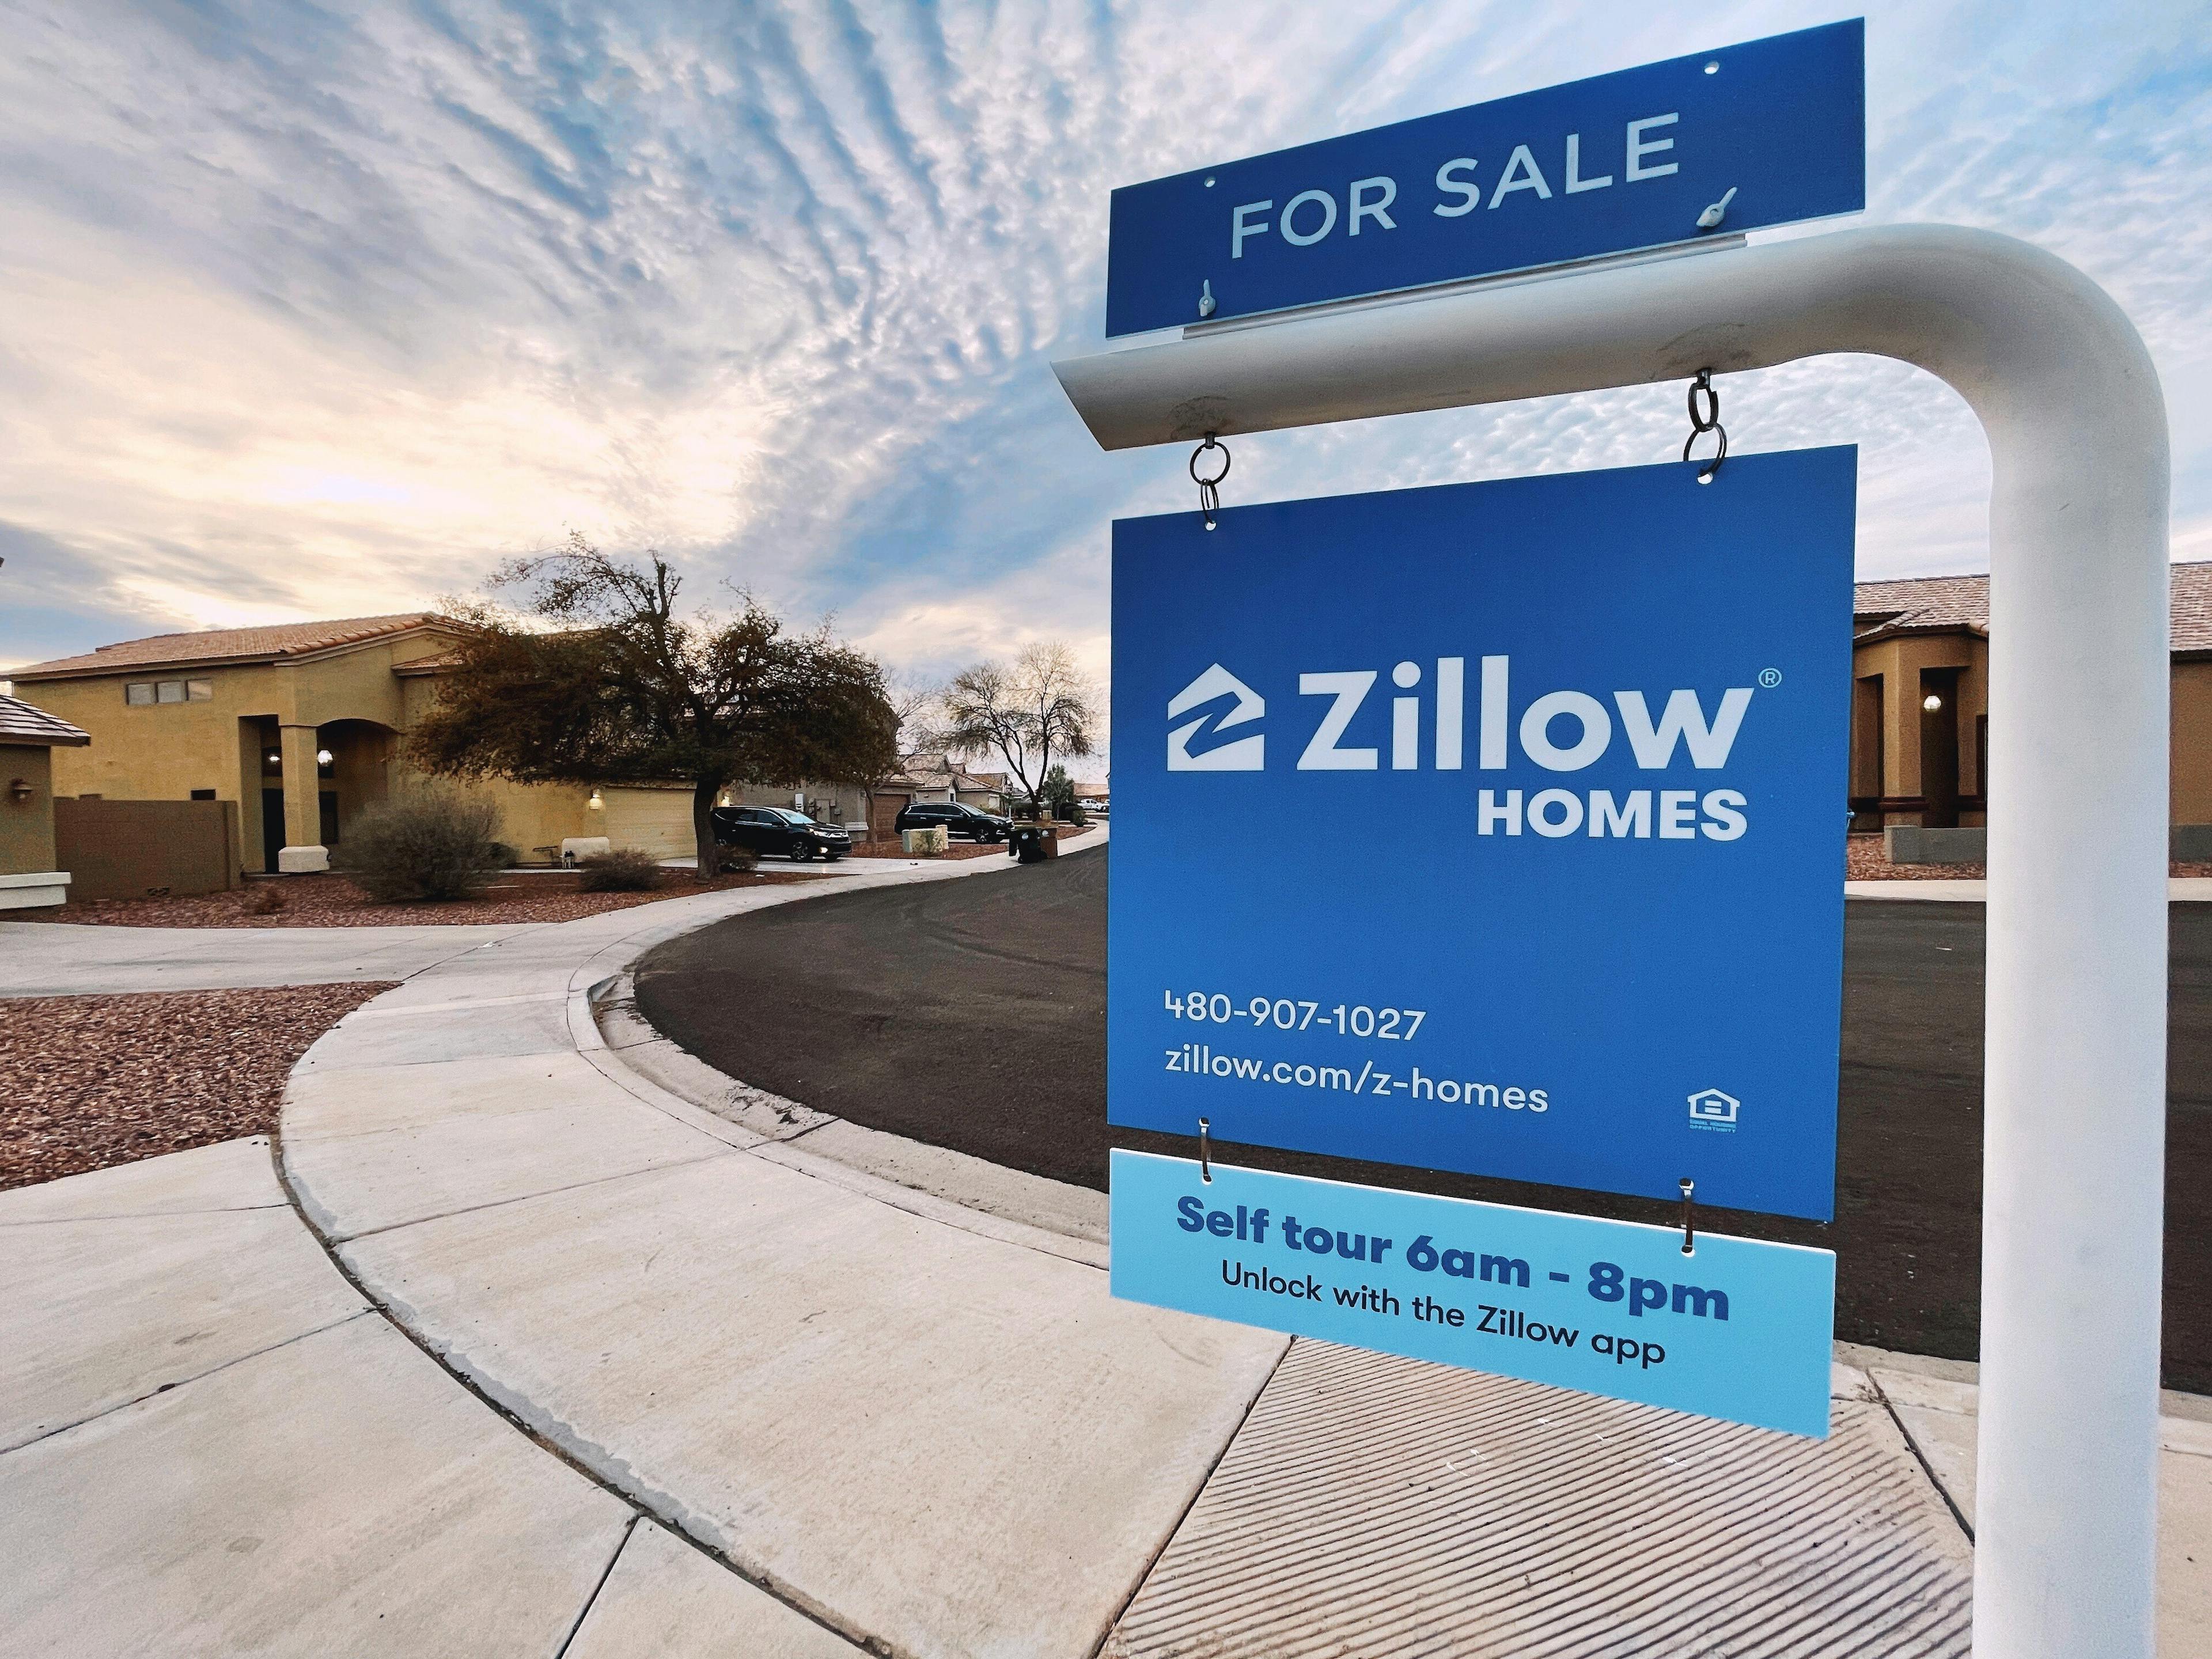 Poster showcasing Zillow homes for sale with corresponding phone numbers for potential buyers